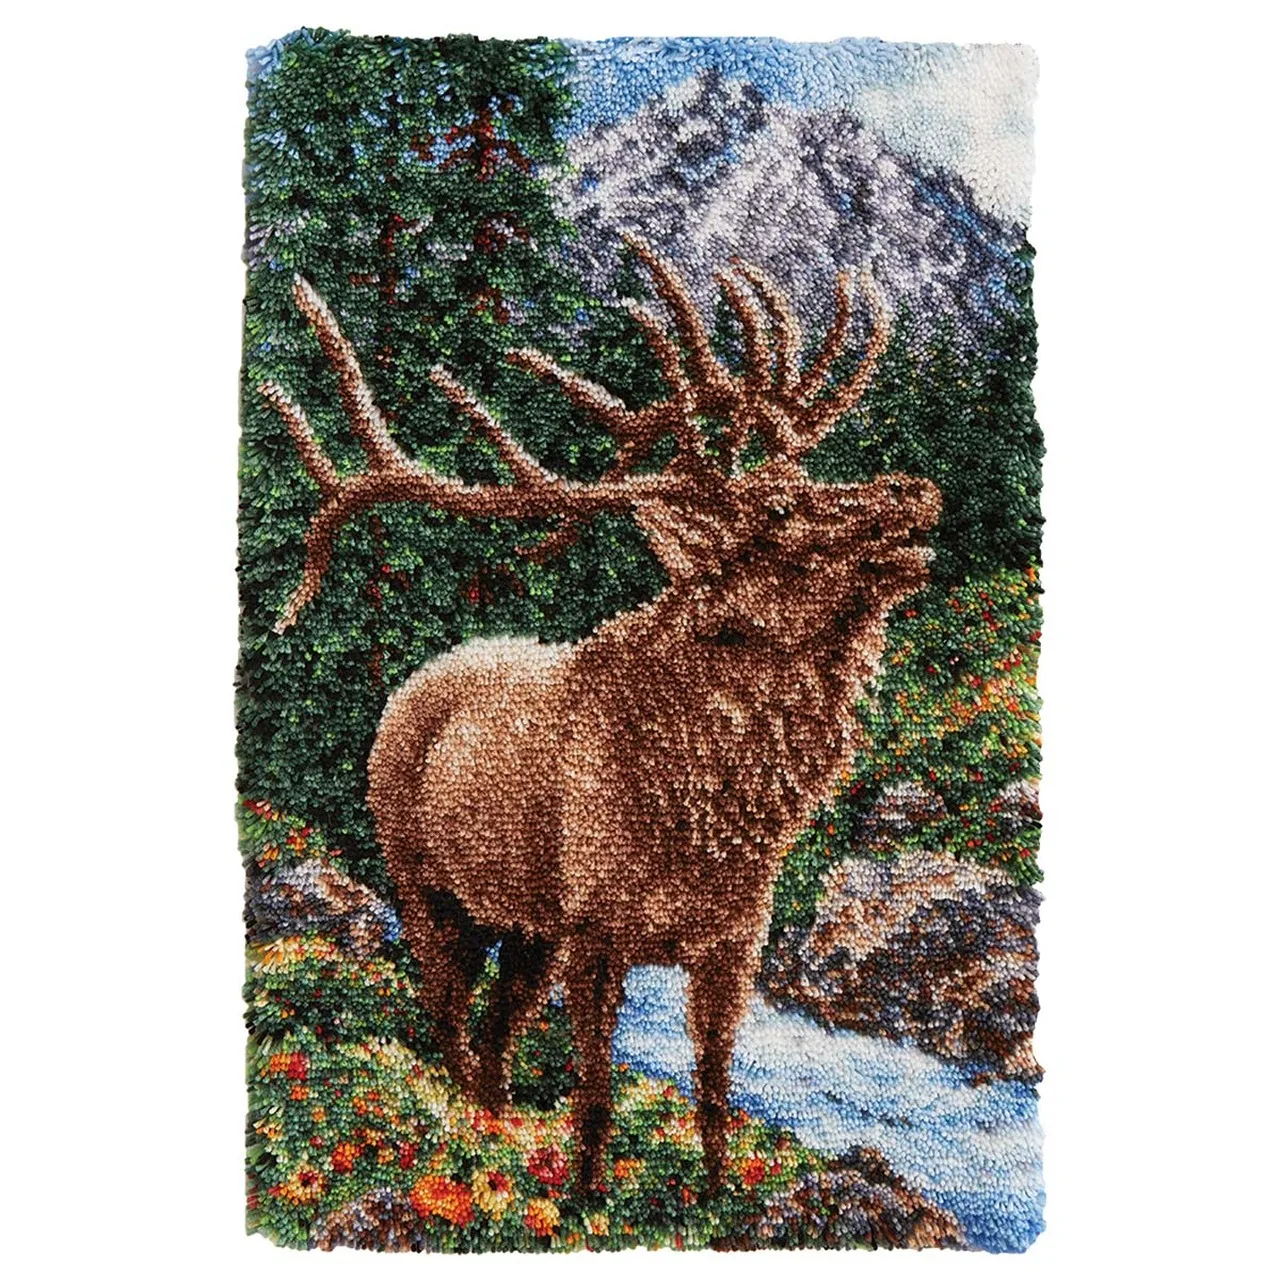 

Latch Hook Kits Majestic Elk Wall Hanging DIY Carpet Rug Pre-Printed Canvas with Non-Skid Backing Floor Mat 69x102cm